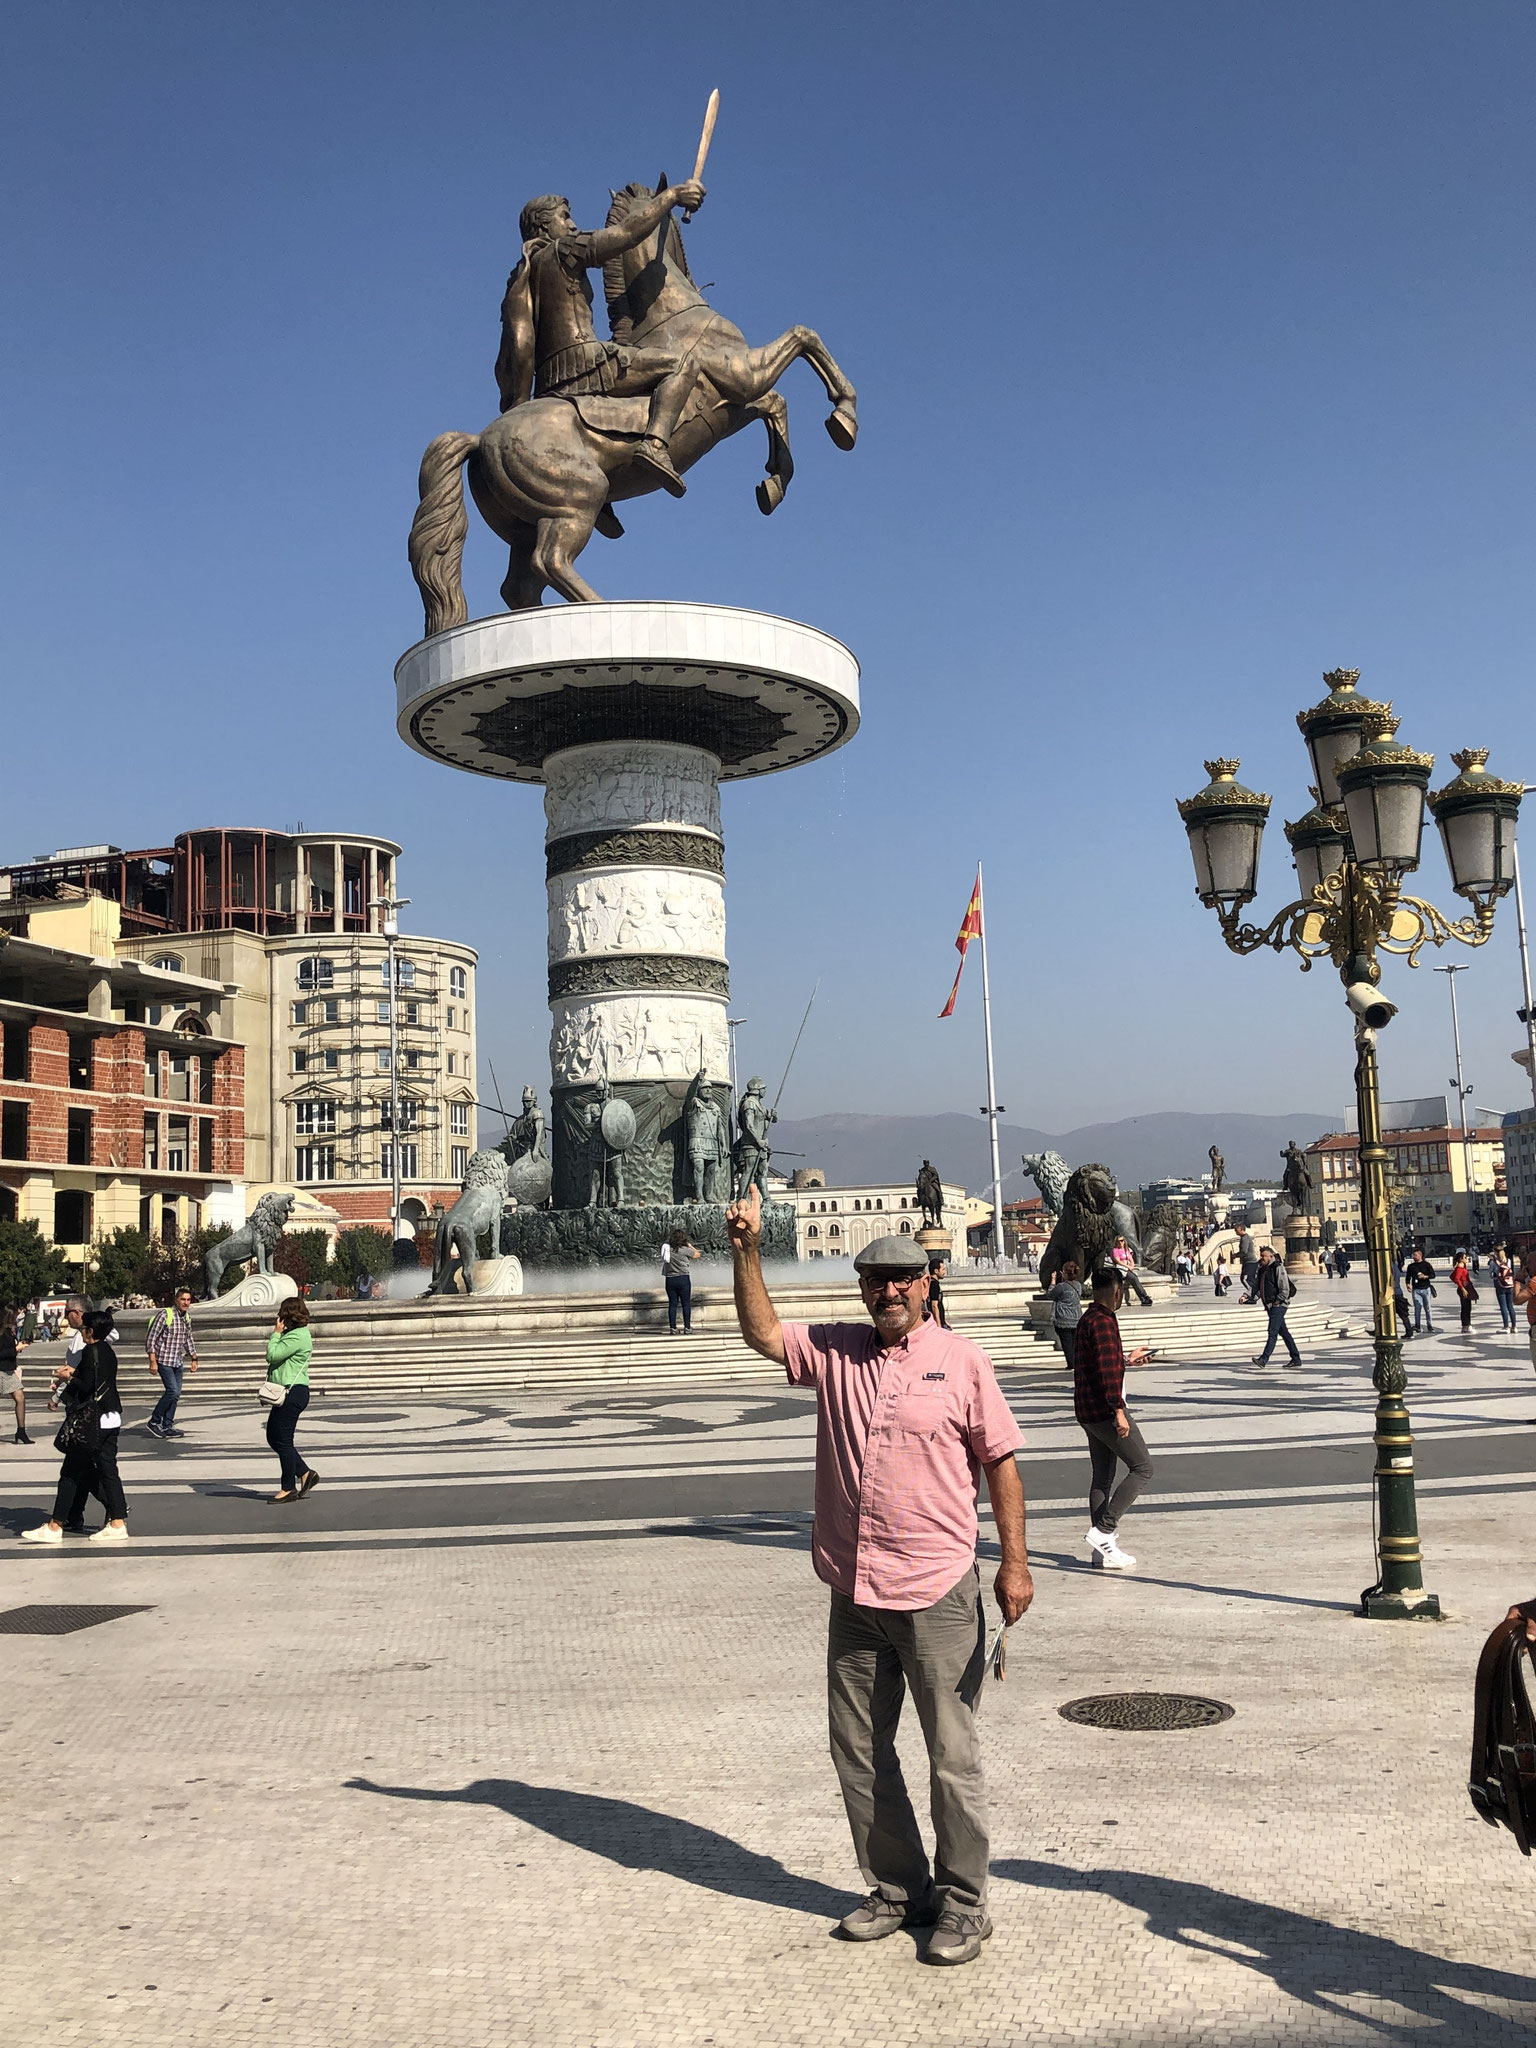 Jerry with Alexander in Macedonia Square.